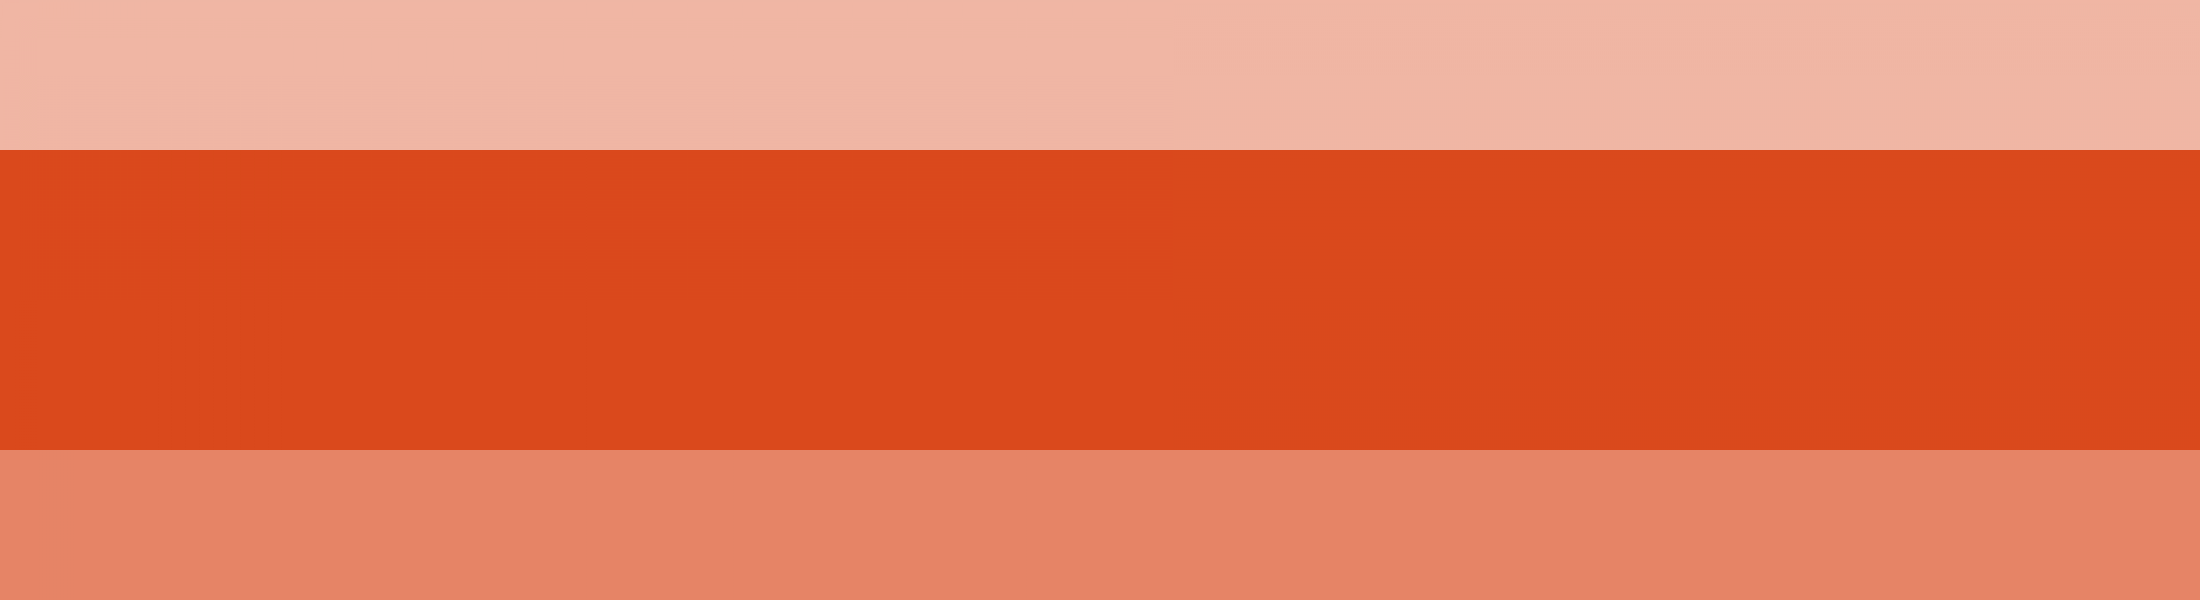 Optimized Home Page Border 1 - Orange (2200x600), Png Download